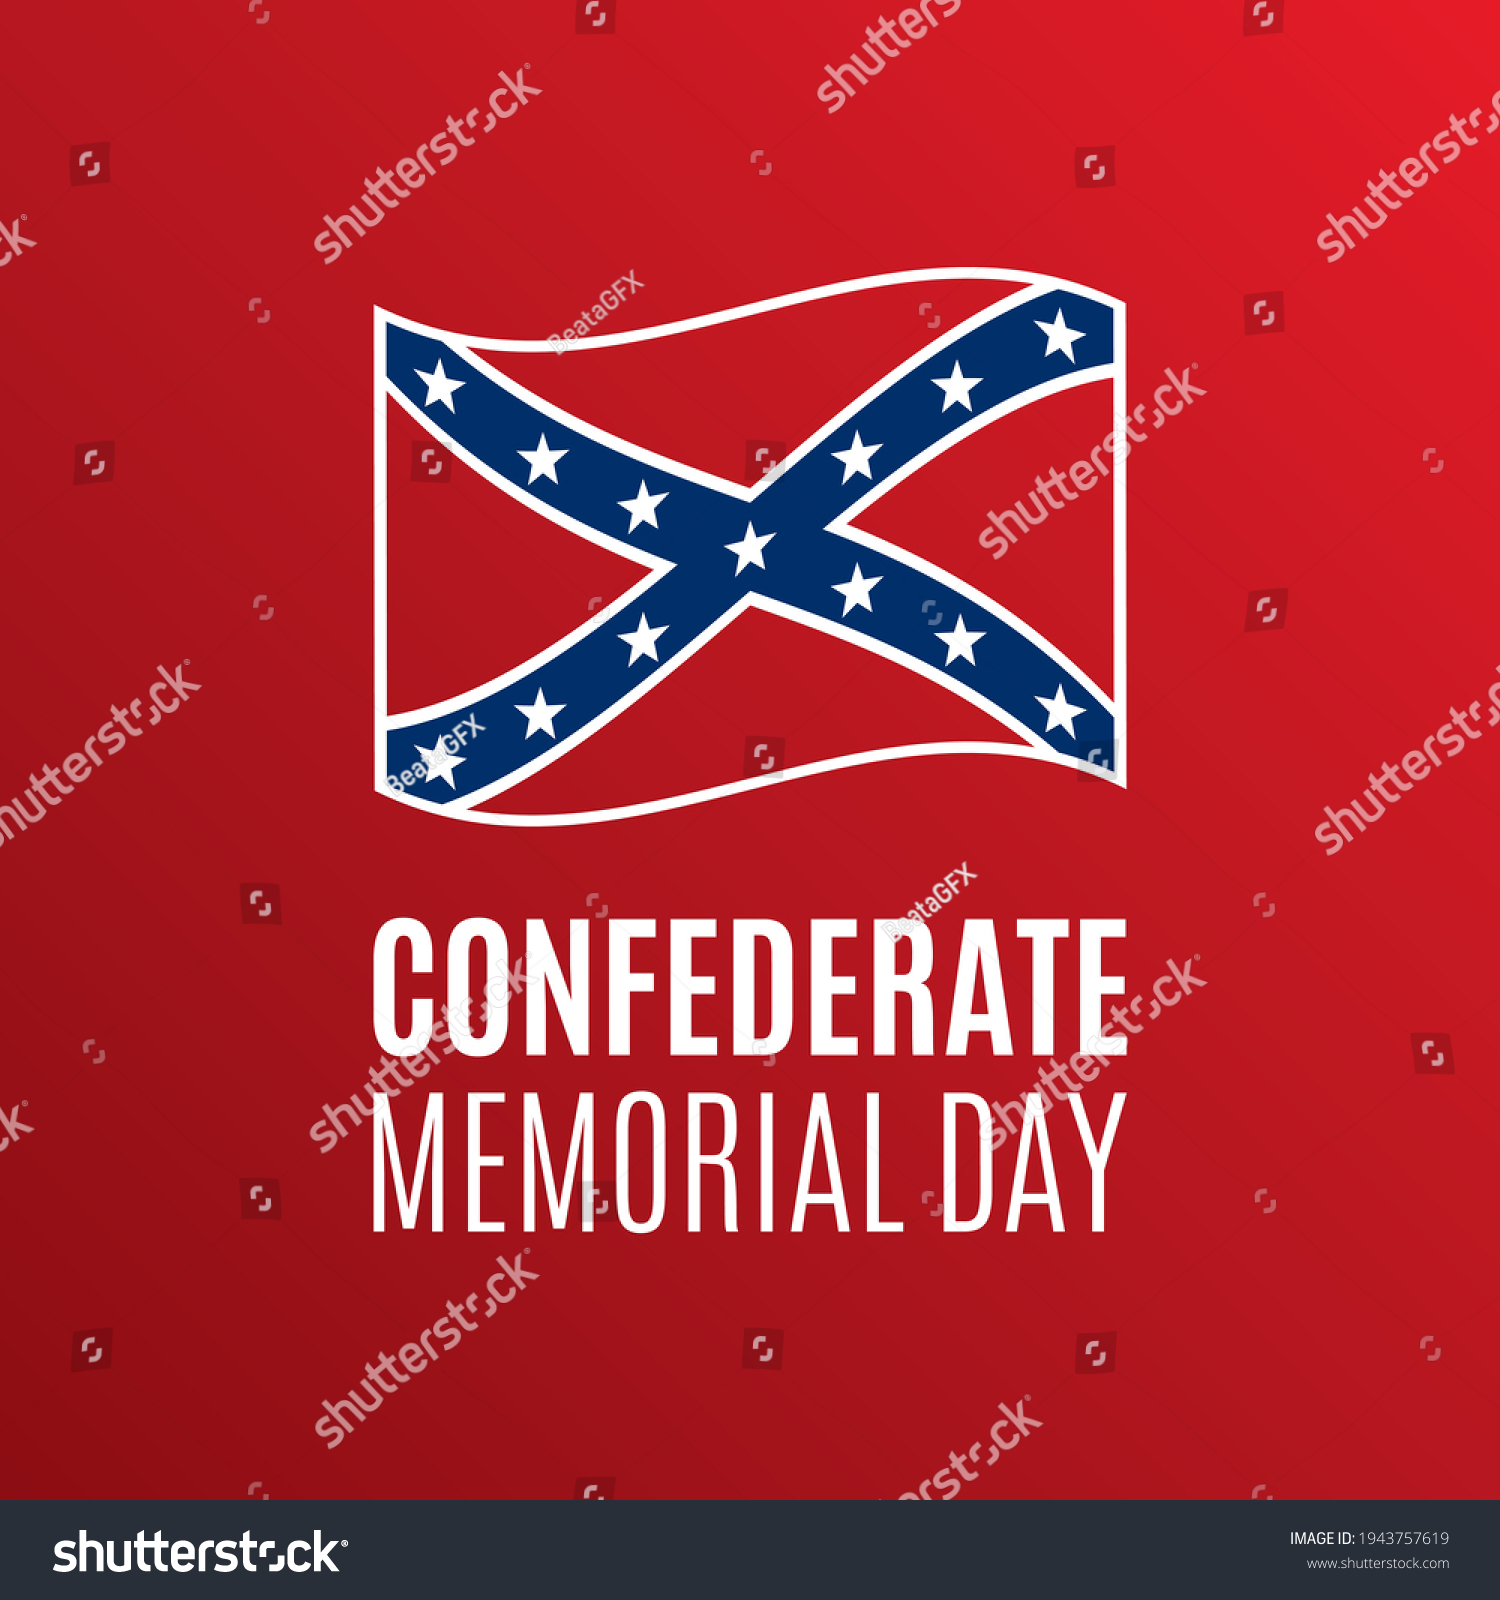 SVG of Confederate Memorial Day vector. Confederate waving flag icon vector. Remembrance of Confederate soldiers who have died in military service vector illustration. Important day svg